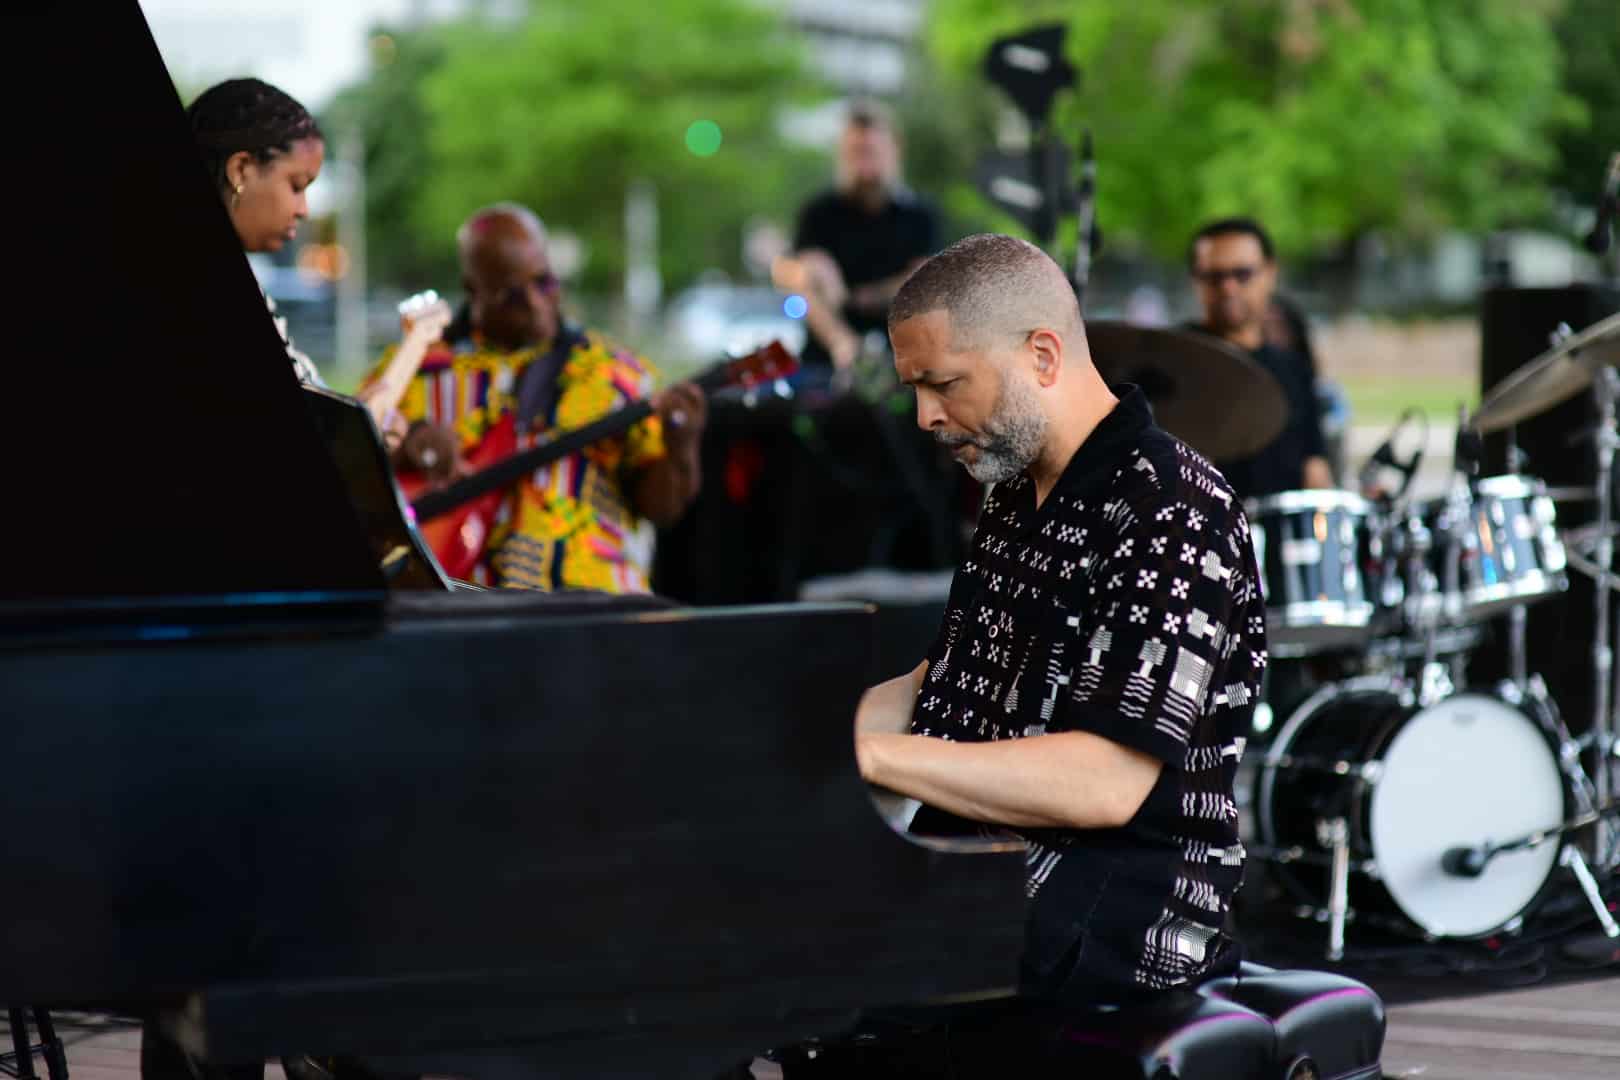 Jason Moran plays at Discovery Green as part of Jazzy Sundays in the Parks made possible by Kinder Foundation. Photo by Jamaal Ellis